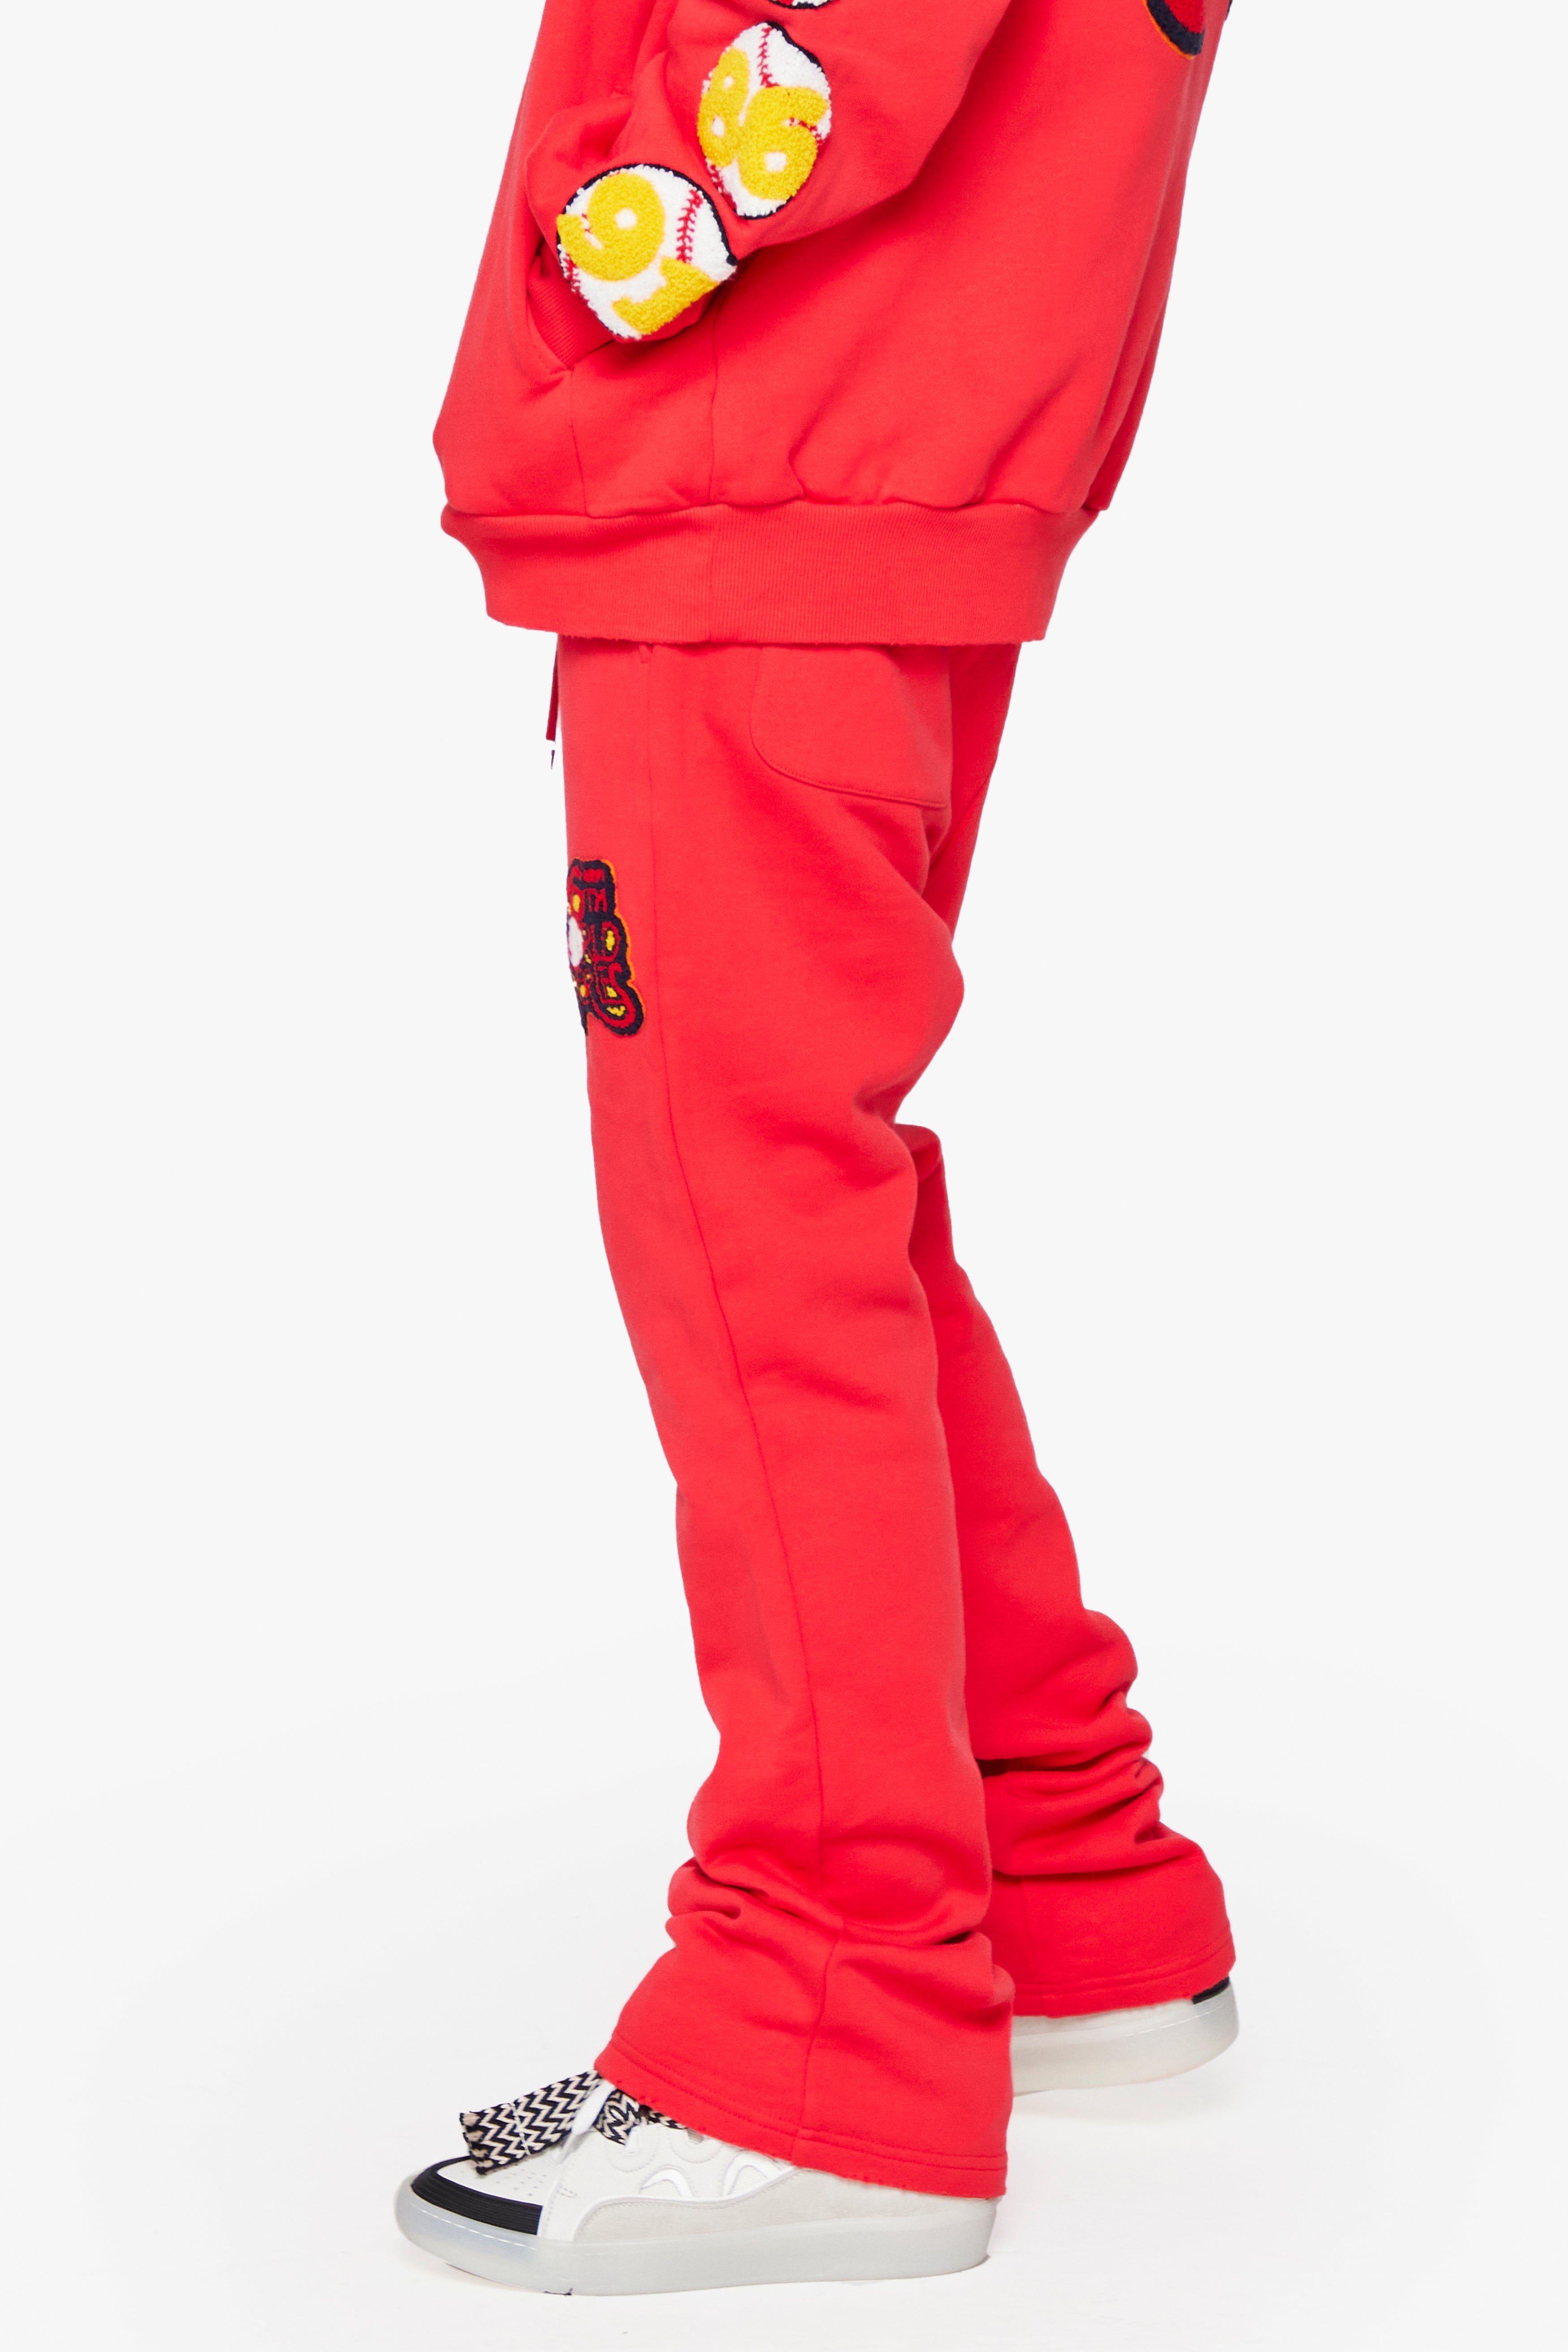 6thNBRHD FLEECE PANTS STACKED "CHAMPS" RED